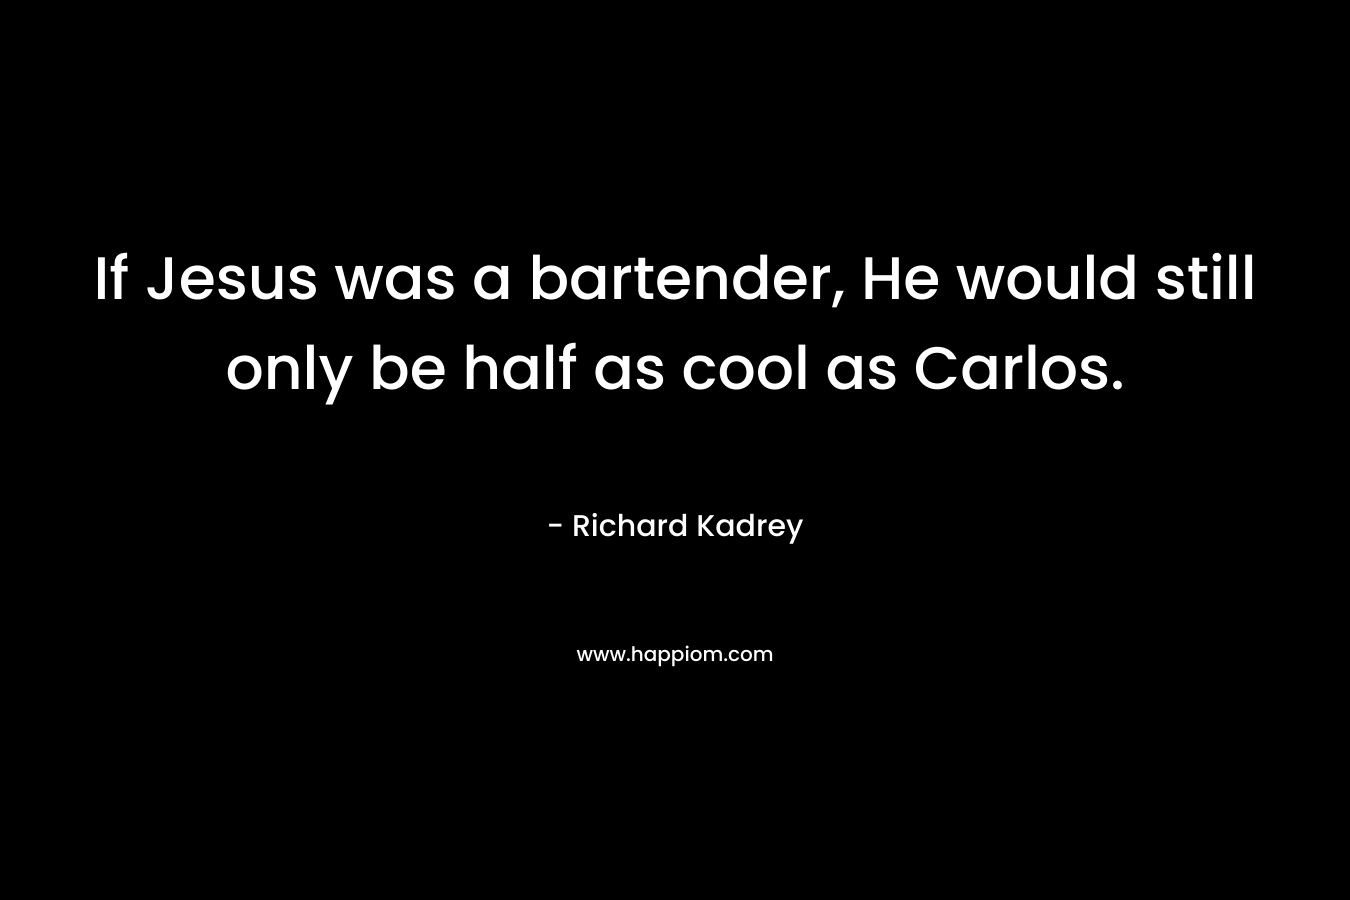 If Jesus was a bartender, He would still only be half as cool as Carlos. – Richard Kadrey